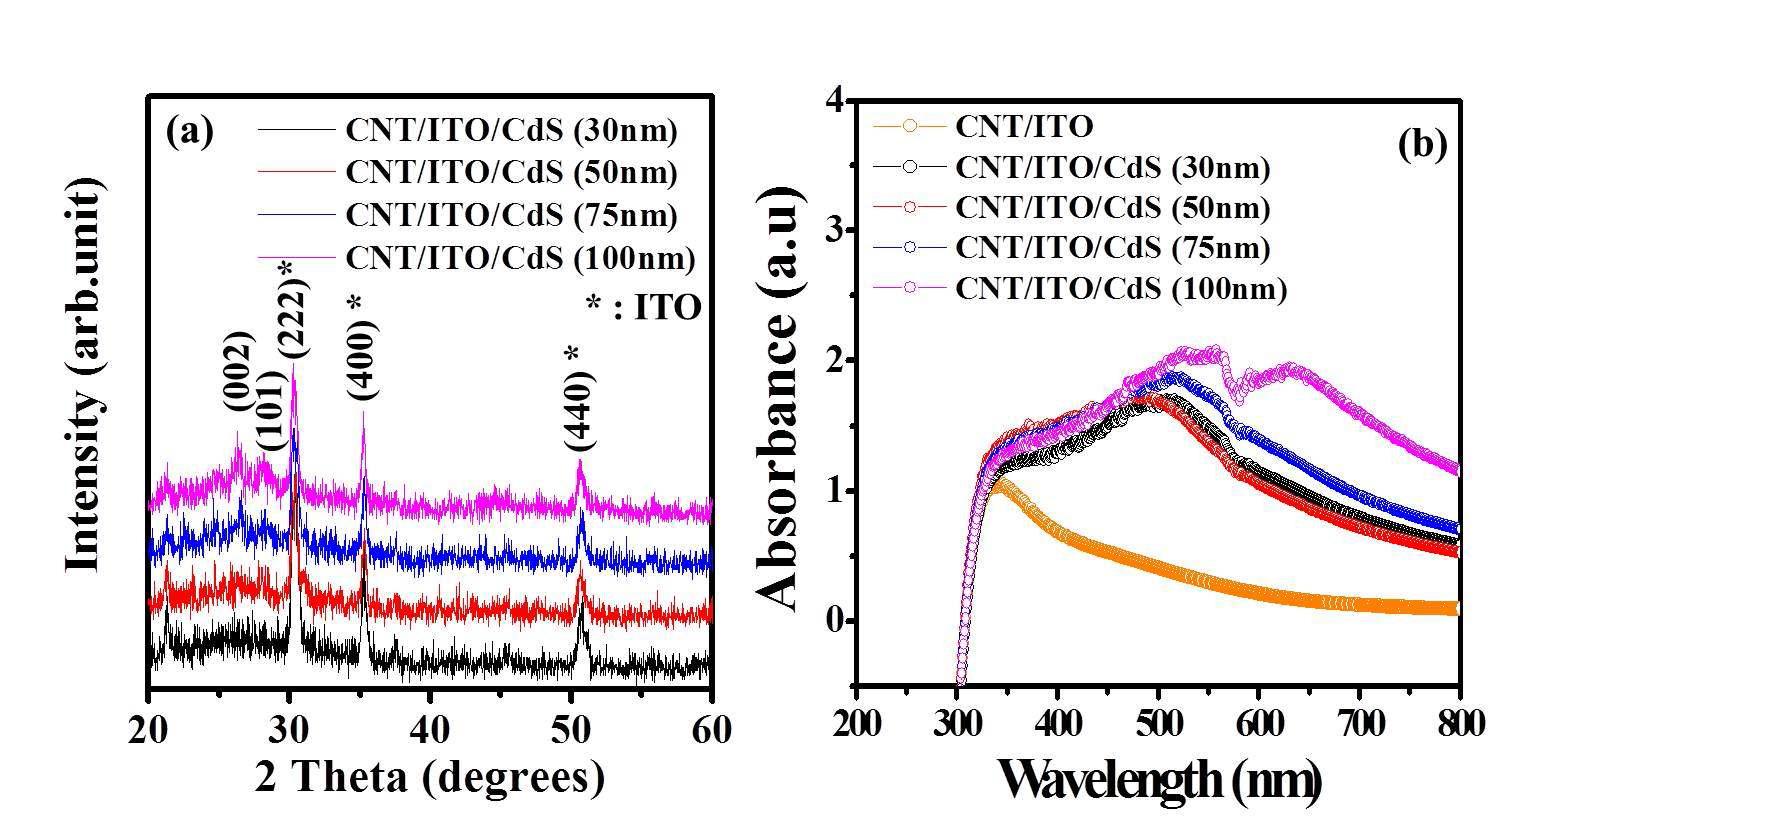 (a) XRD Patterns of the CdS:H/ITO/SWCNTs Nanocomposites with Different CdS:H Thicknesses and (b) Absorbance of the Visible Light as a Function of Light Wavelength for Different Thicknesses of the CdS:H Films in CdS:H/ITO/SWCNTs Composites.